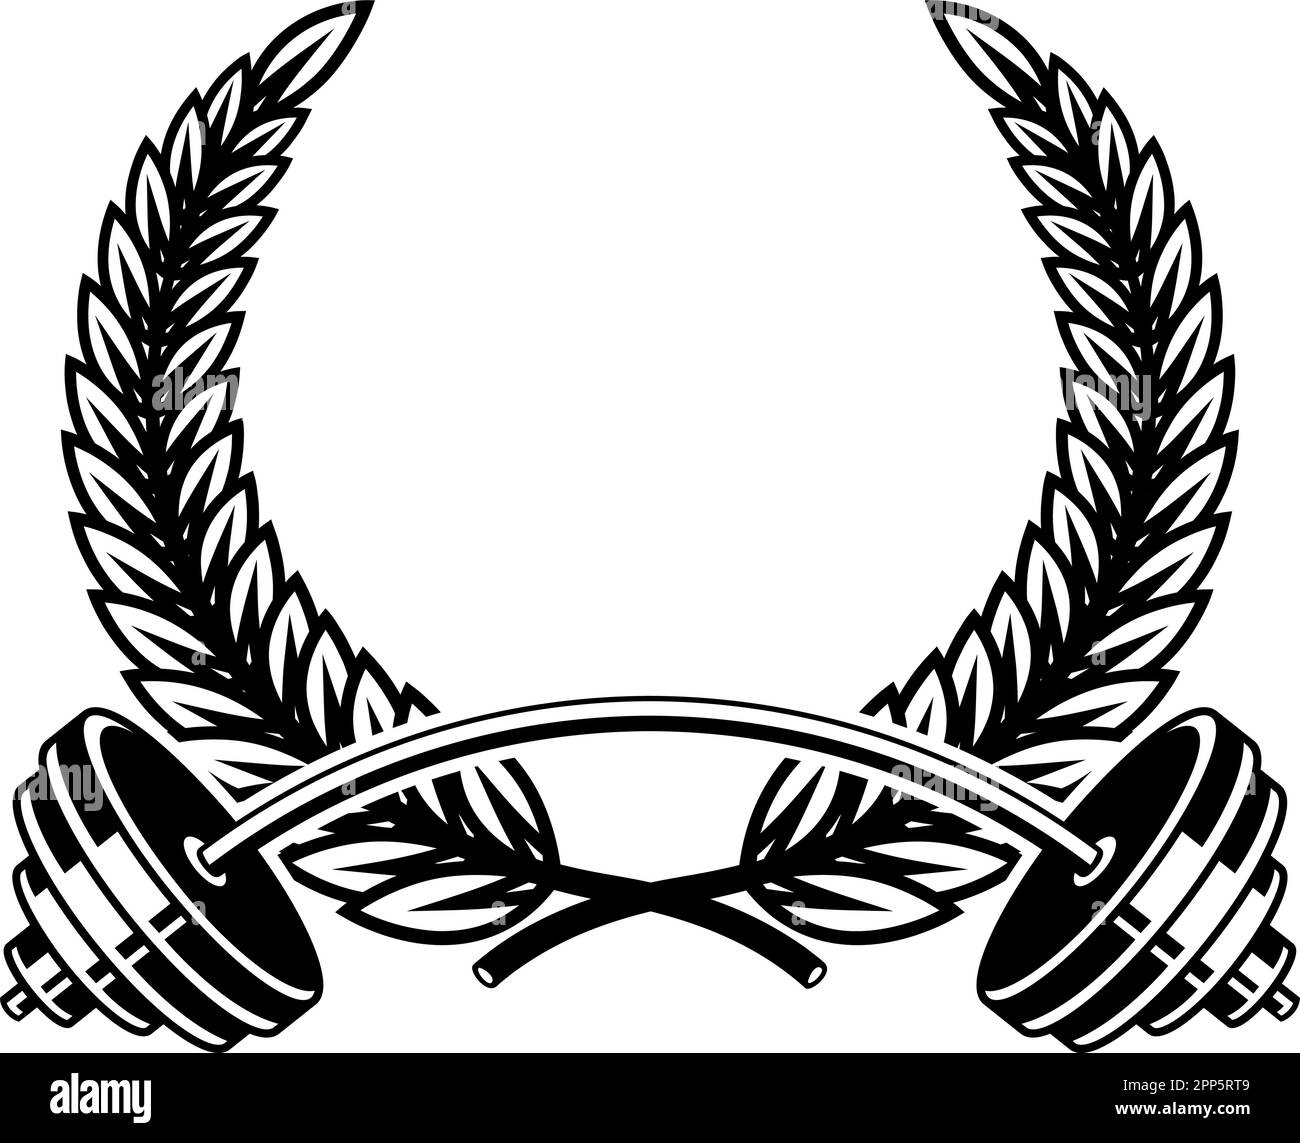 Emblem template with barbell and wreath. Design element for logo, sign, emblem. Vector illustration, Emblem template with barbell and wreath. Design e Stock Vector